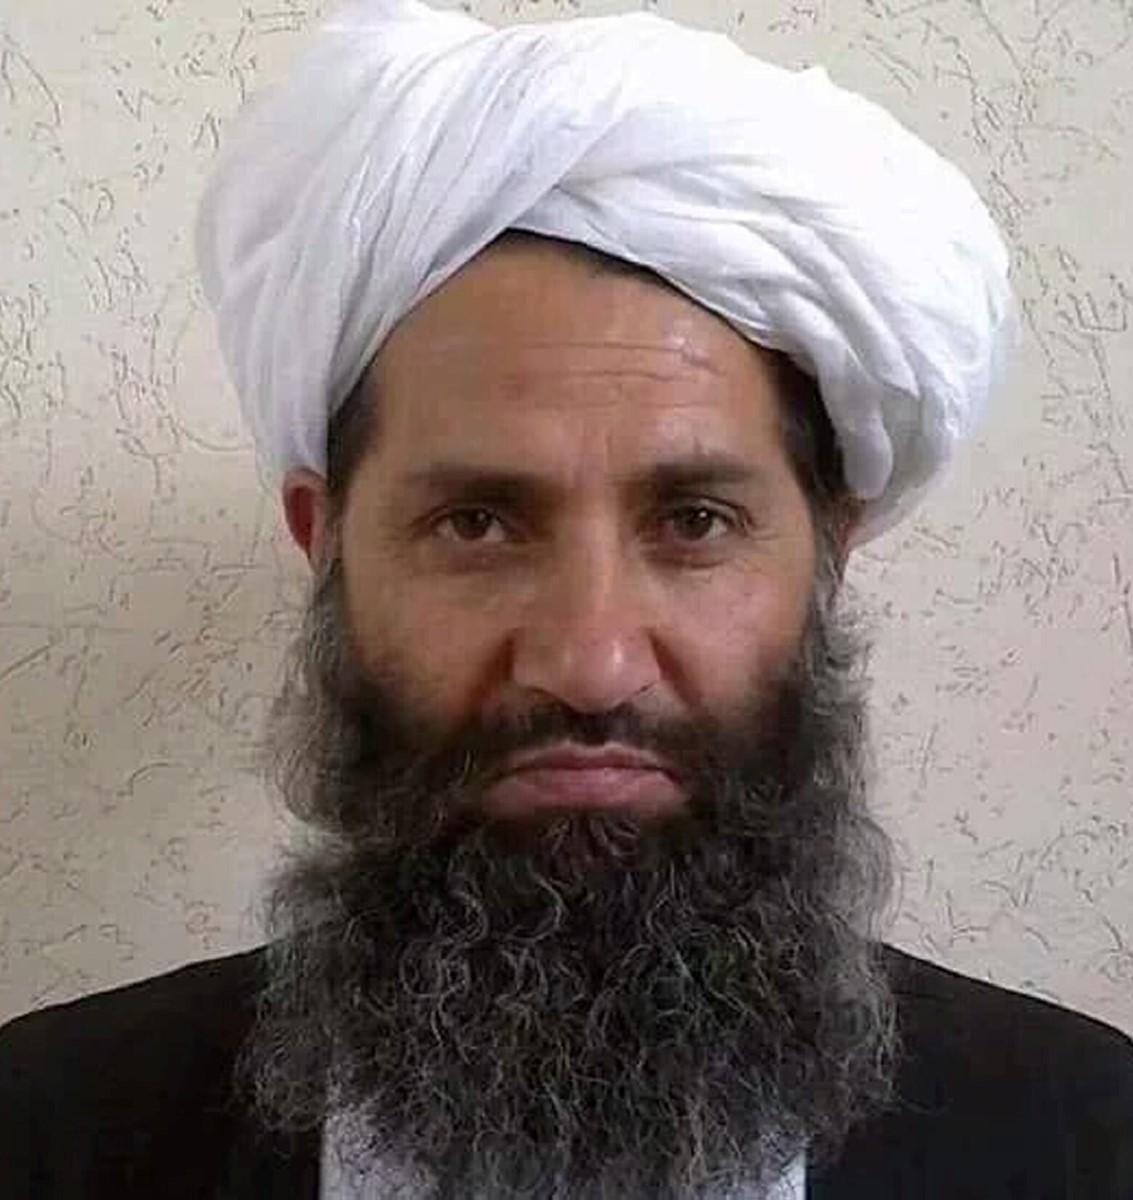 This undated handout photograph released by the Afghan Taliban on May 25, 2016 shows, according to the Afghan Taliban, the new Mullah Haibatullah Akhundzada posing for a photograph at an undisclosed location. Photo: AFP